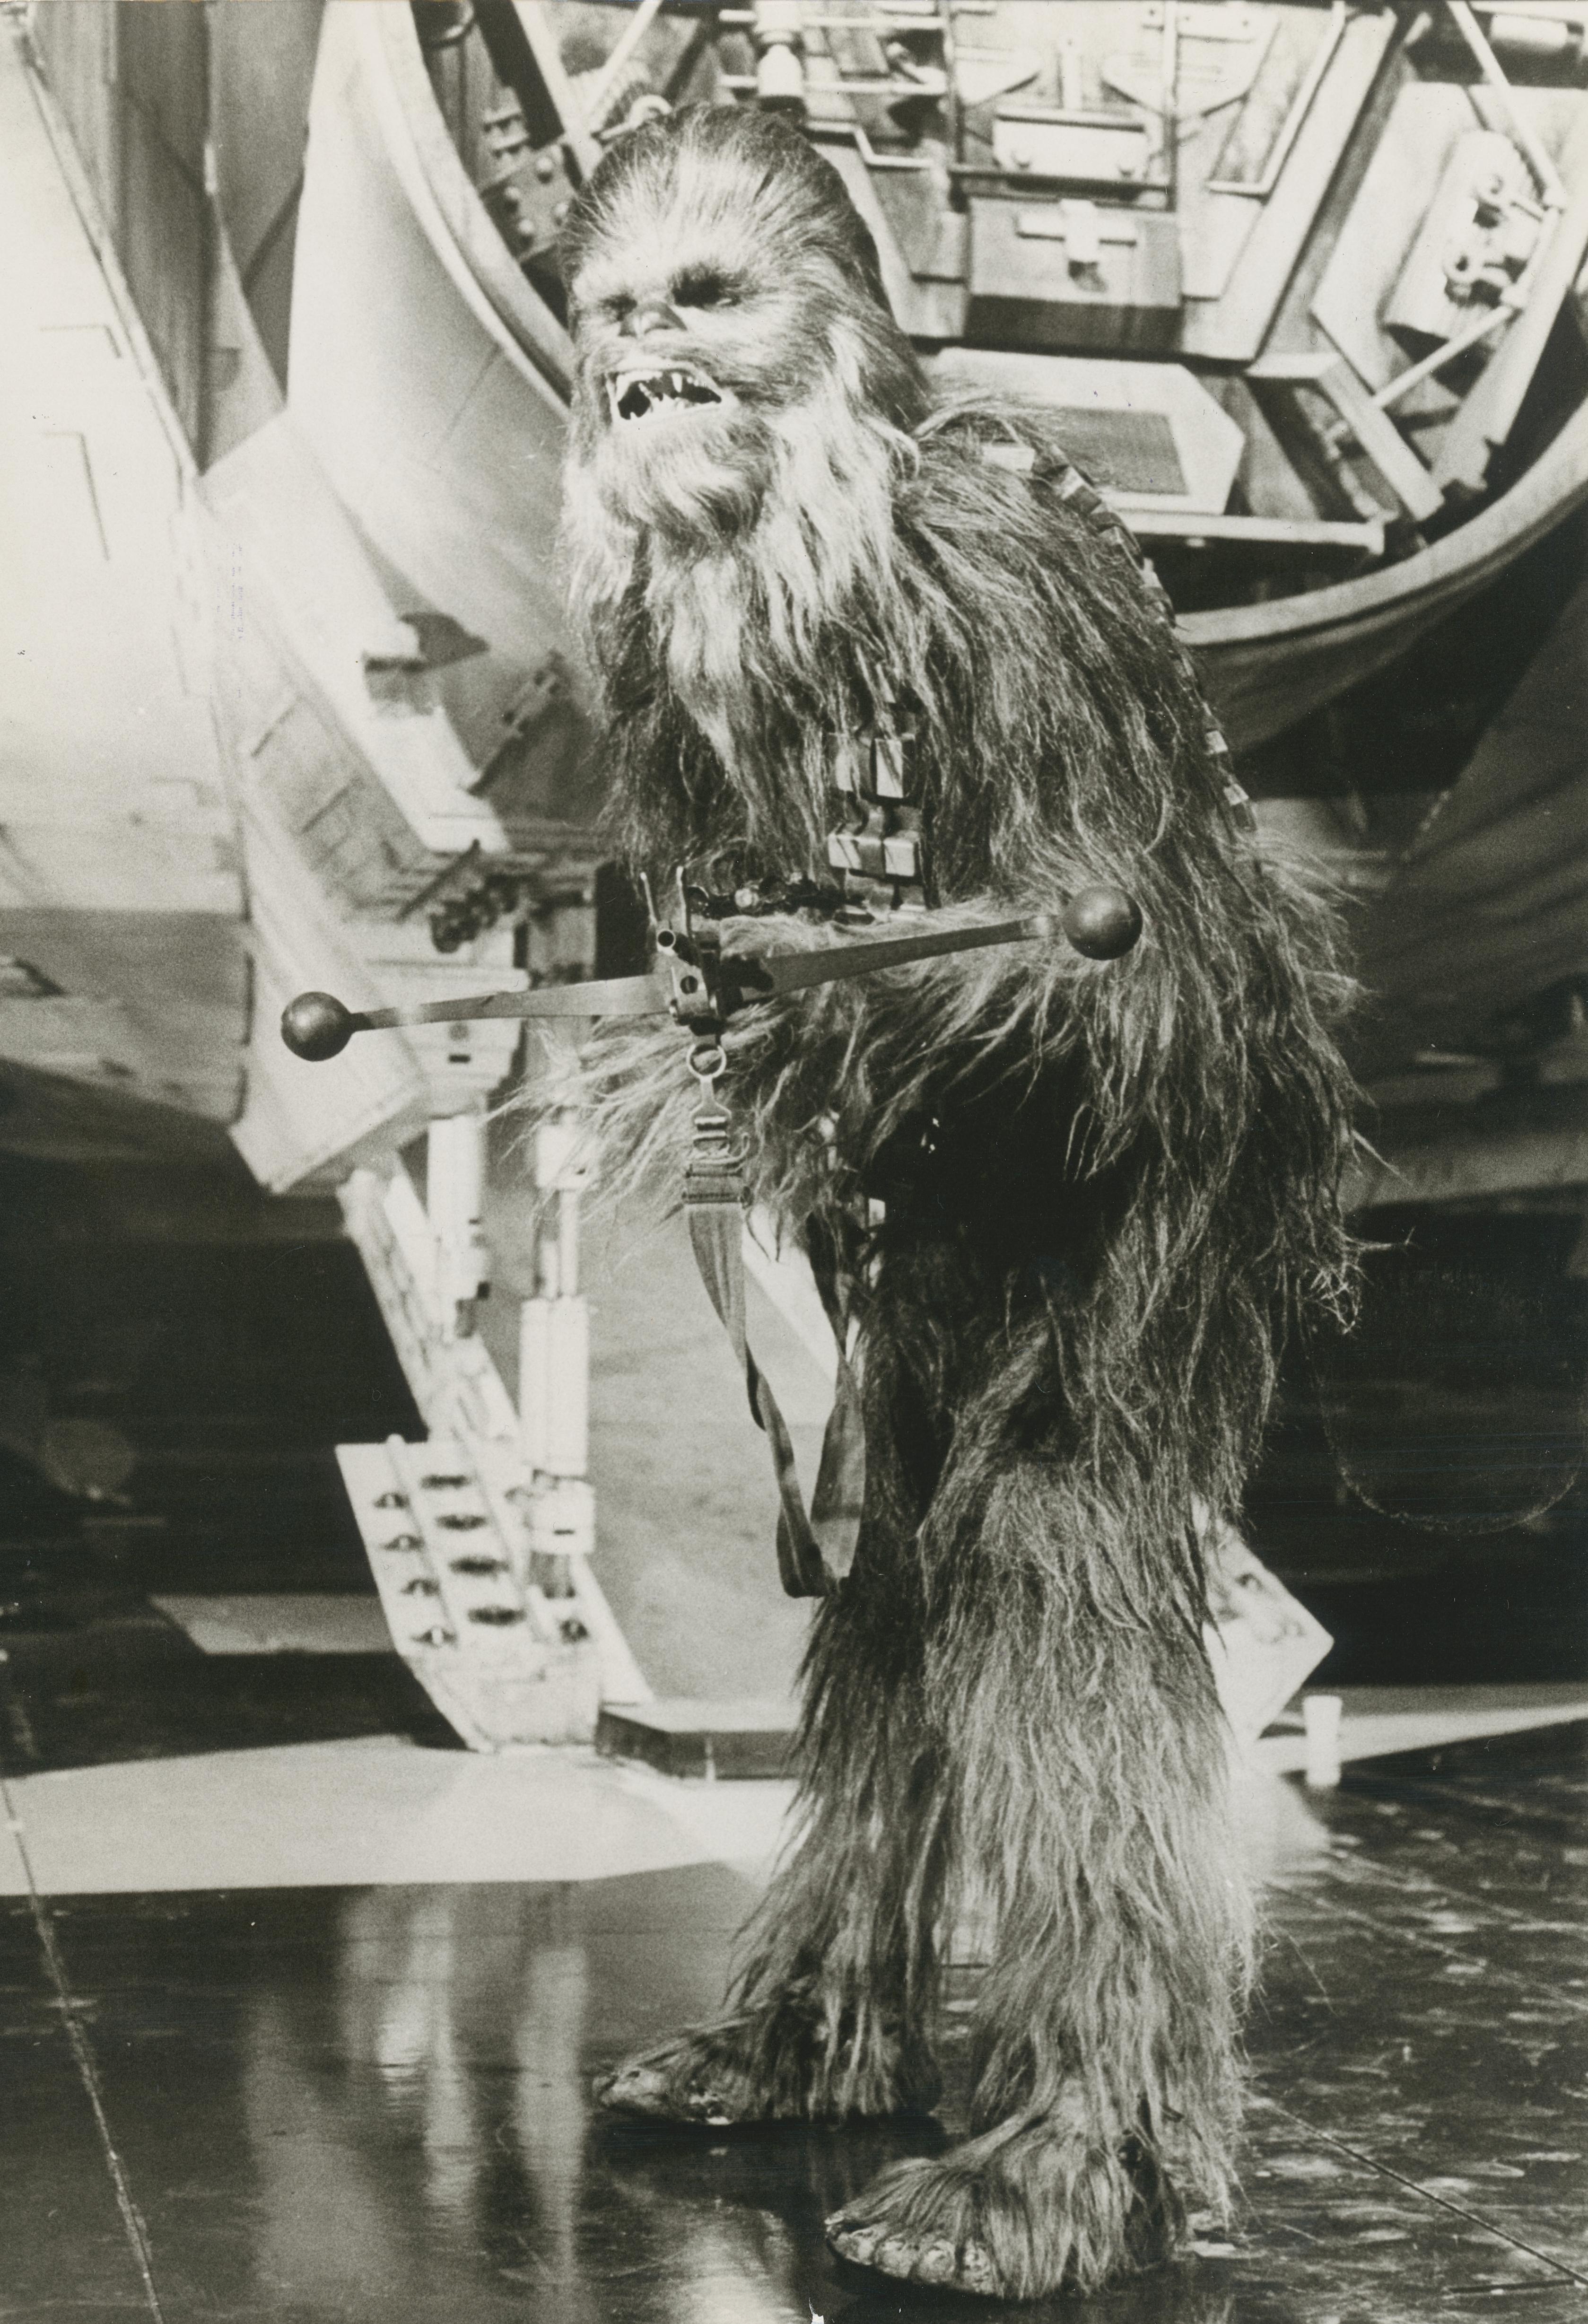 Unknown Black and White Photograph - Star Wars, Chewbacca, Sience Fiction Filmstill, 1977